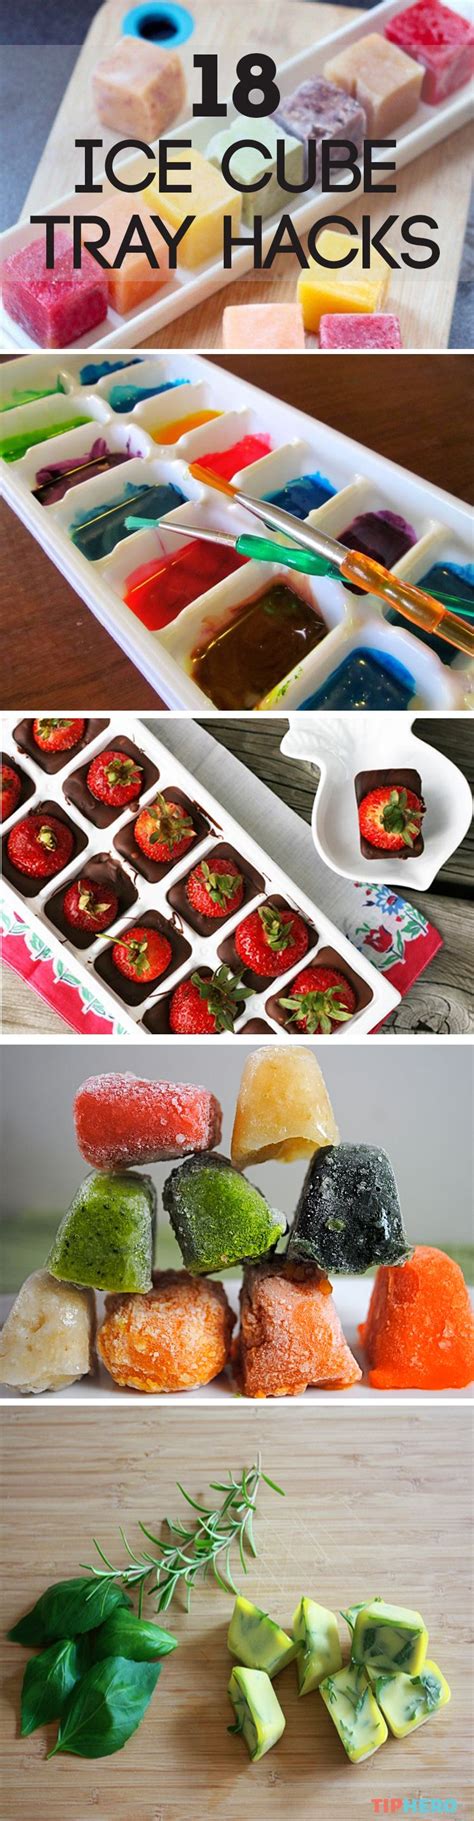 20 Ice Cube Tray Hacks That Arent Just For Summer Baby Food Recipes